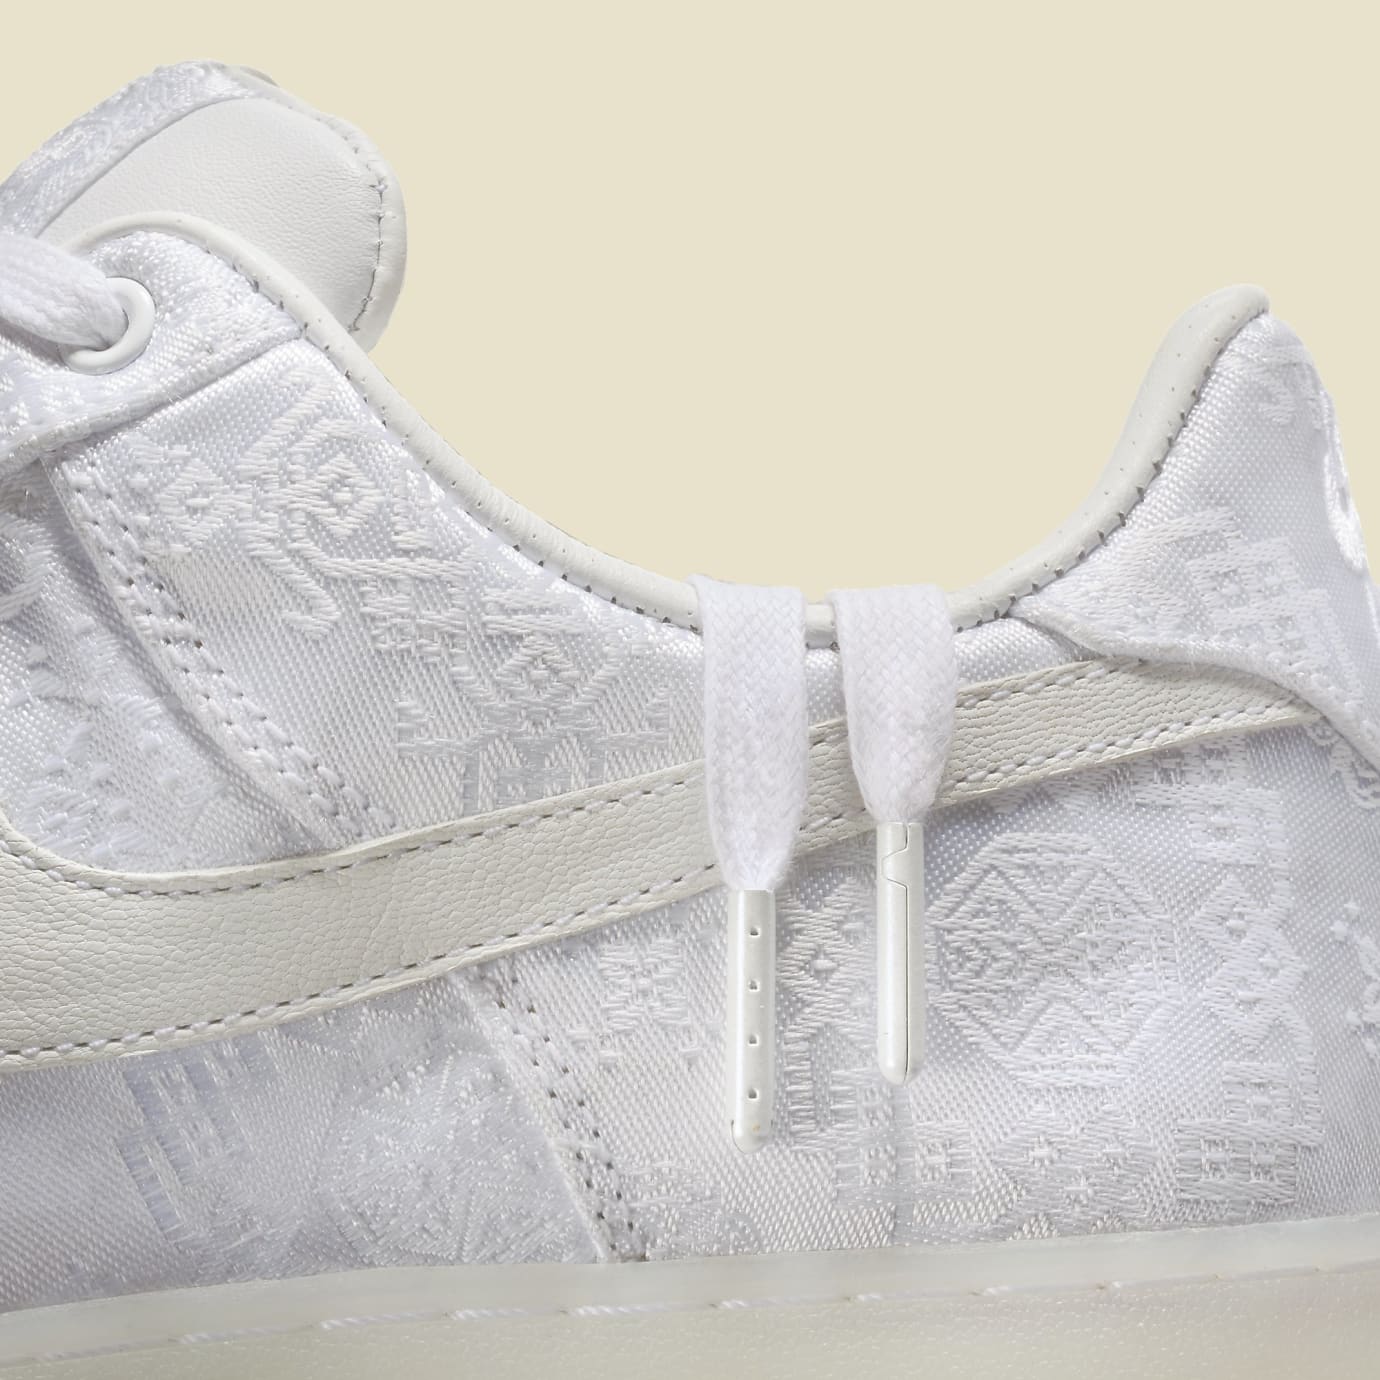 CLOT x Nike Air Force 1 AO9286-100 Official Images | Sole Collector